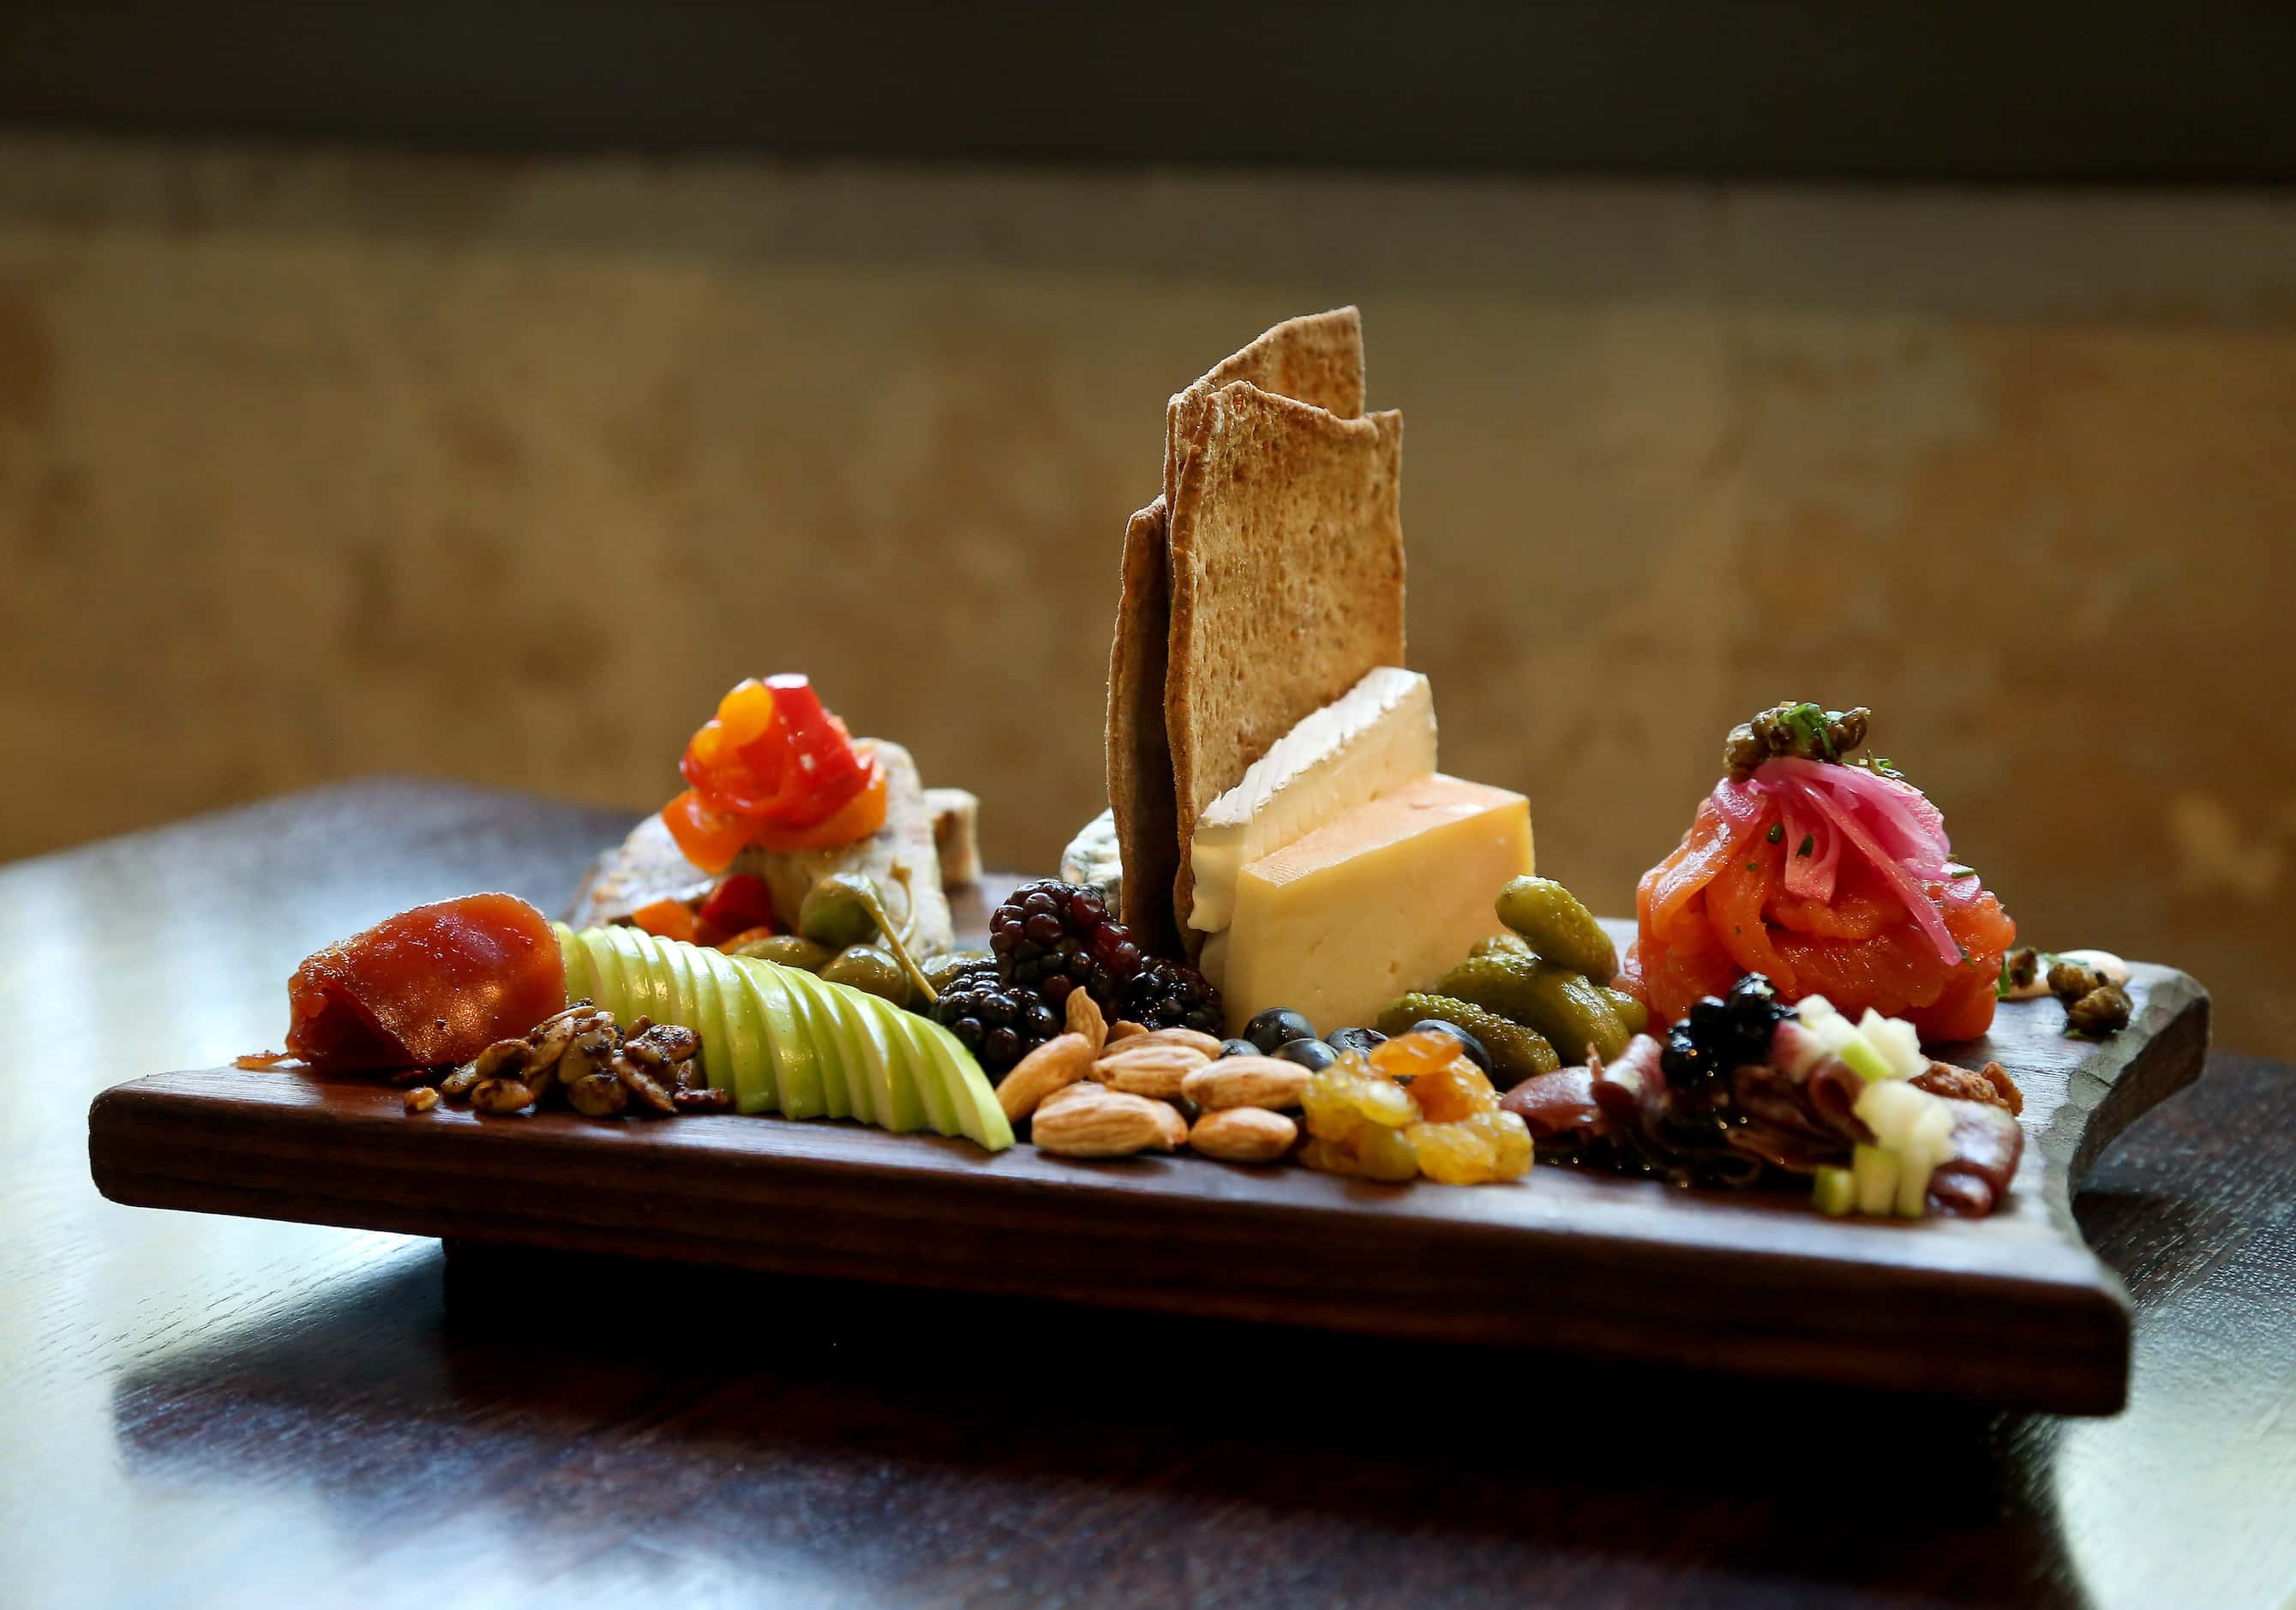 In 2014, the New Big Board evolved to include duck prosciutto, smoked salmon, pork pate and...